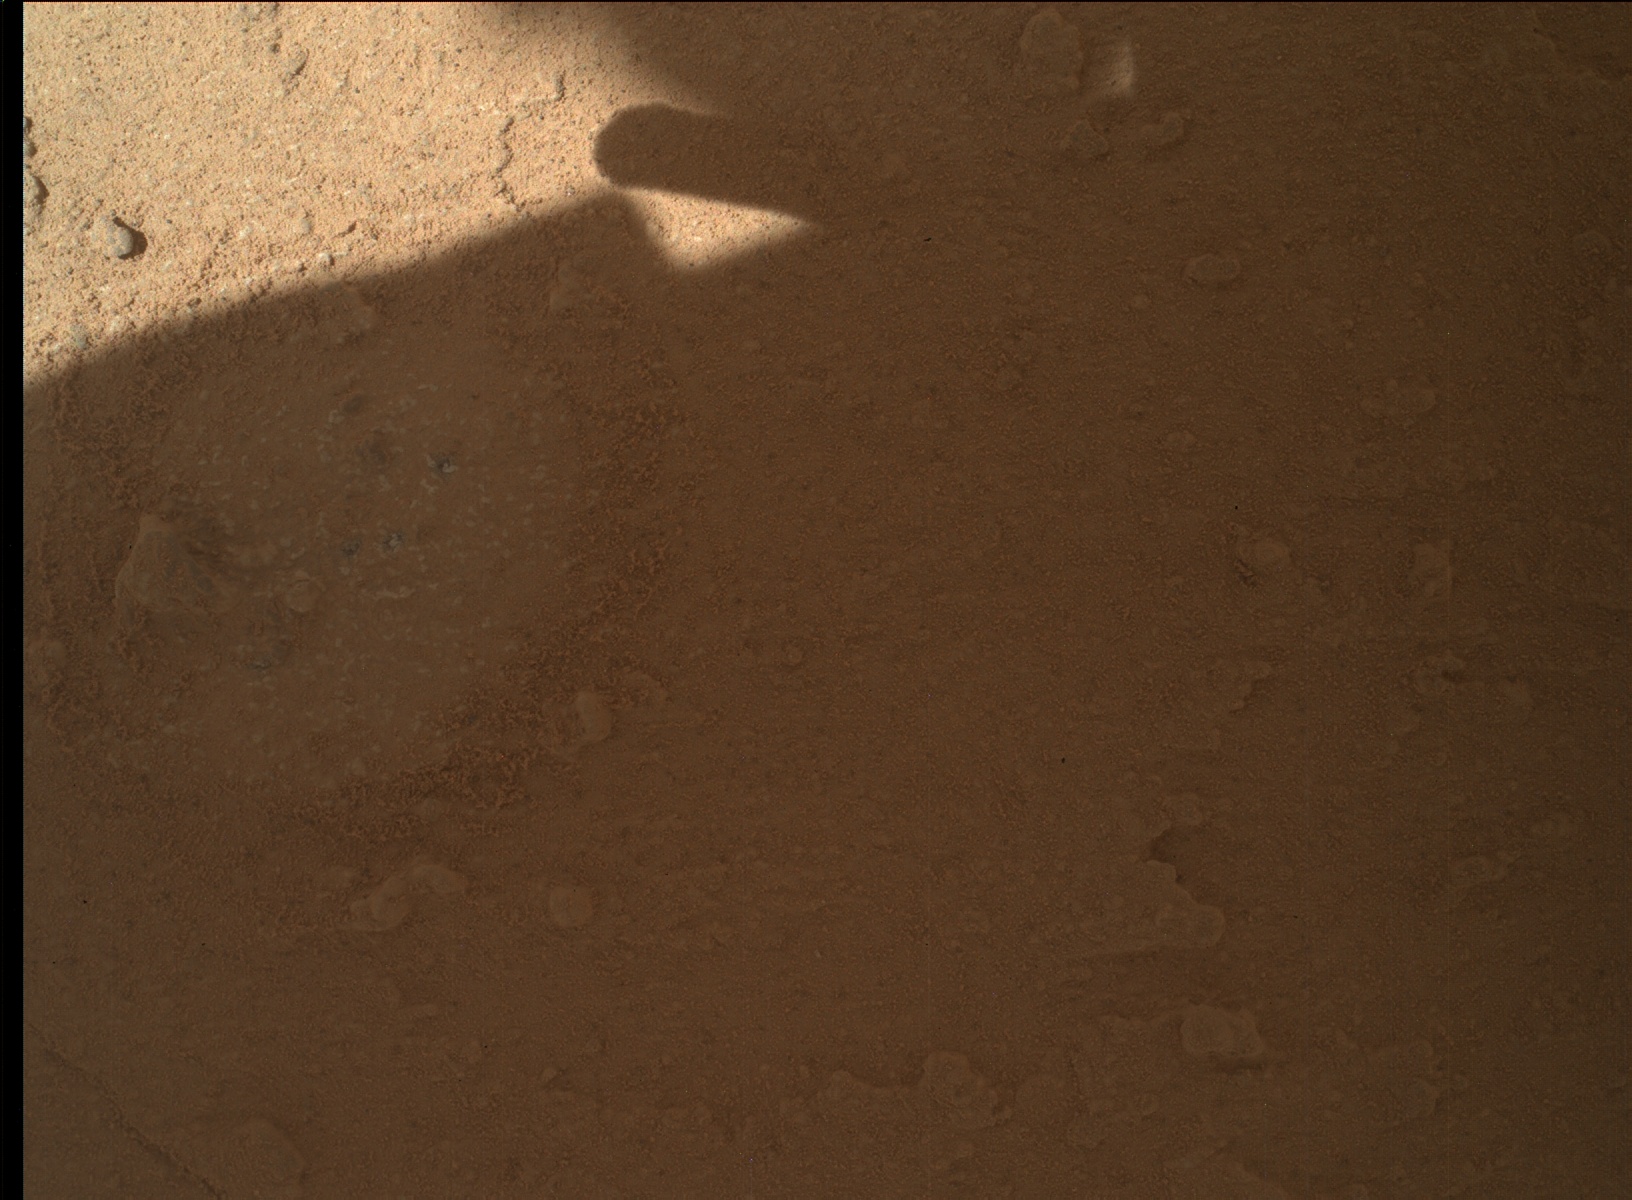 Nasa's Mars rover Curiosity acquired this image using its Mars Hand Lens Imager (MAHLI) on Sol 3817